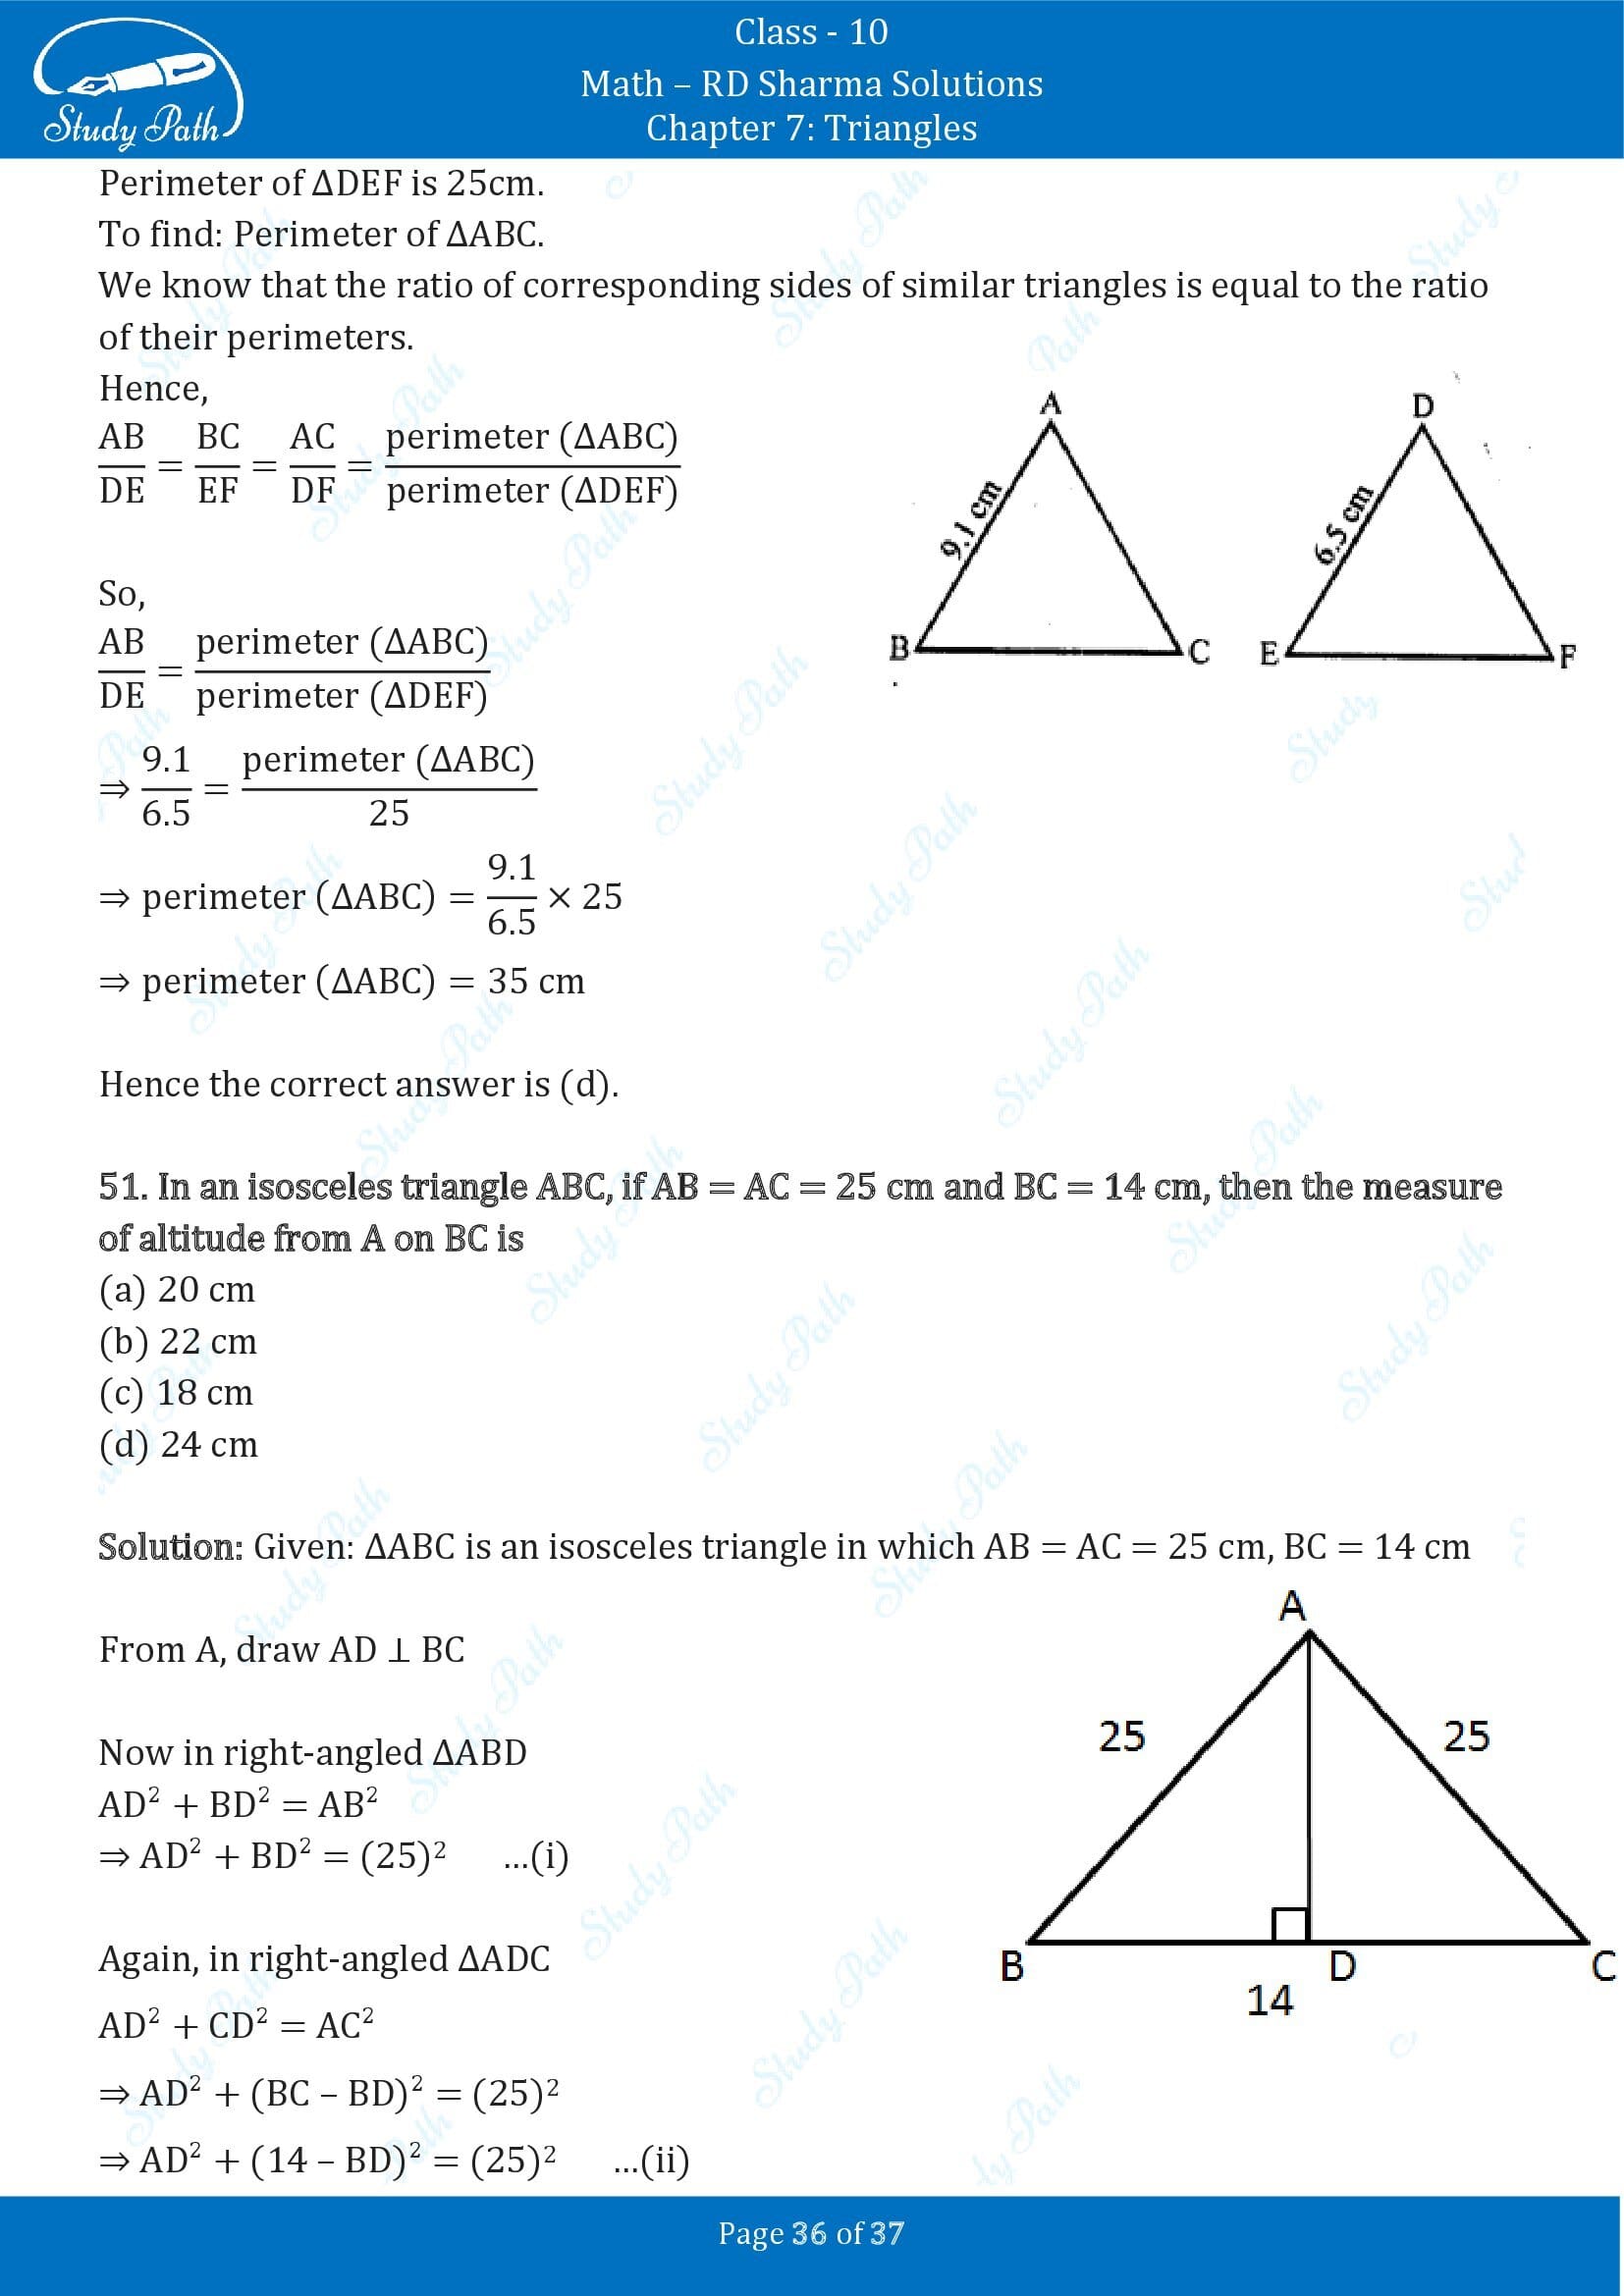 RD Sharma Solutions Class 10 Chapter 7 Triangles Multiple Choice Question MCQs 00036